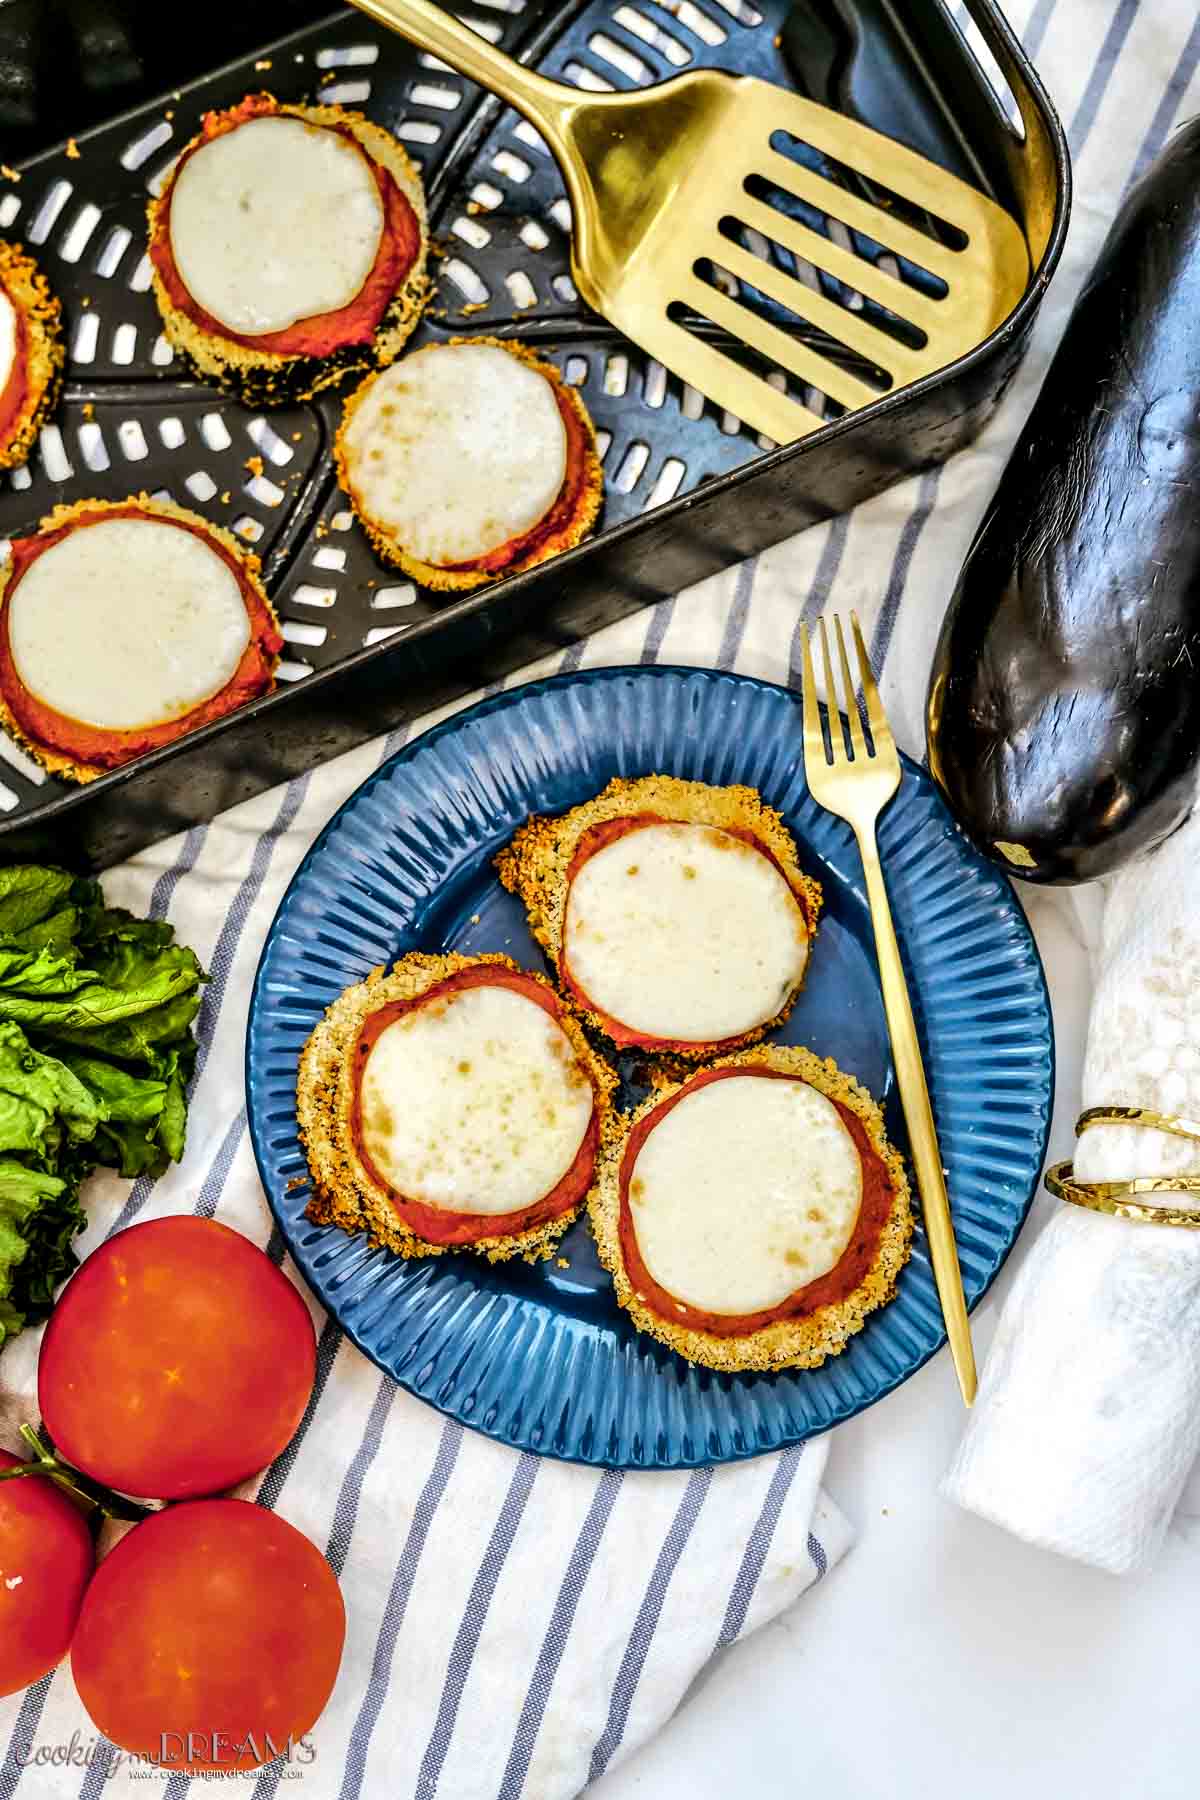 eggplant parmesan slices on a blue plate with a fork and in a air fryer basket